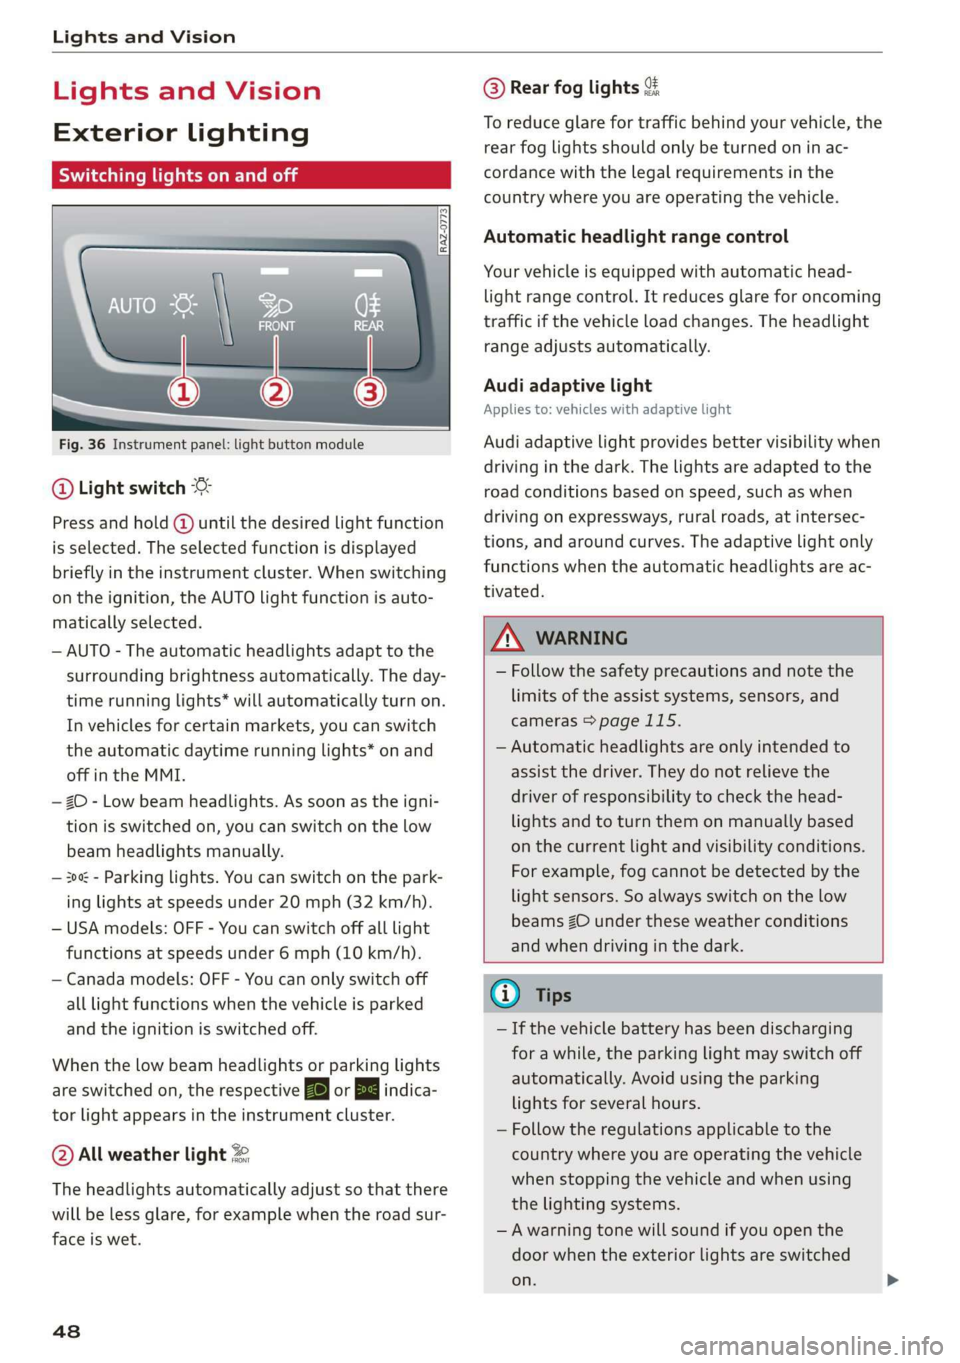 AUDI A7 2020 Service Manual Lights and Vision 
  
Lights and Vision 
Exterior lighting 
Sitar MeL Lats eal 
  
  
Fig. 36 Instrument panel: light button module 
@ Light switch & 
Press and hold @ until the desired light function